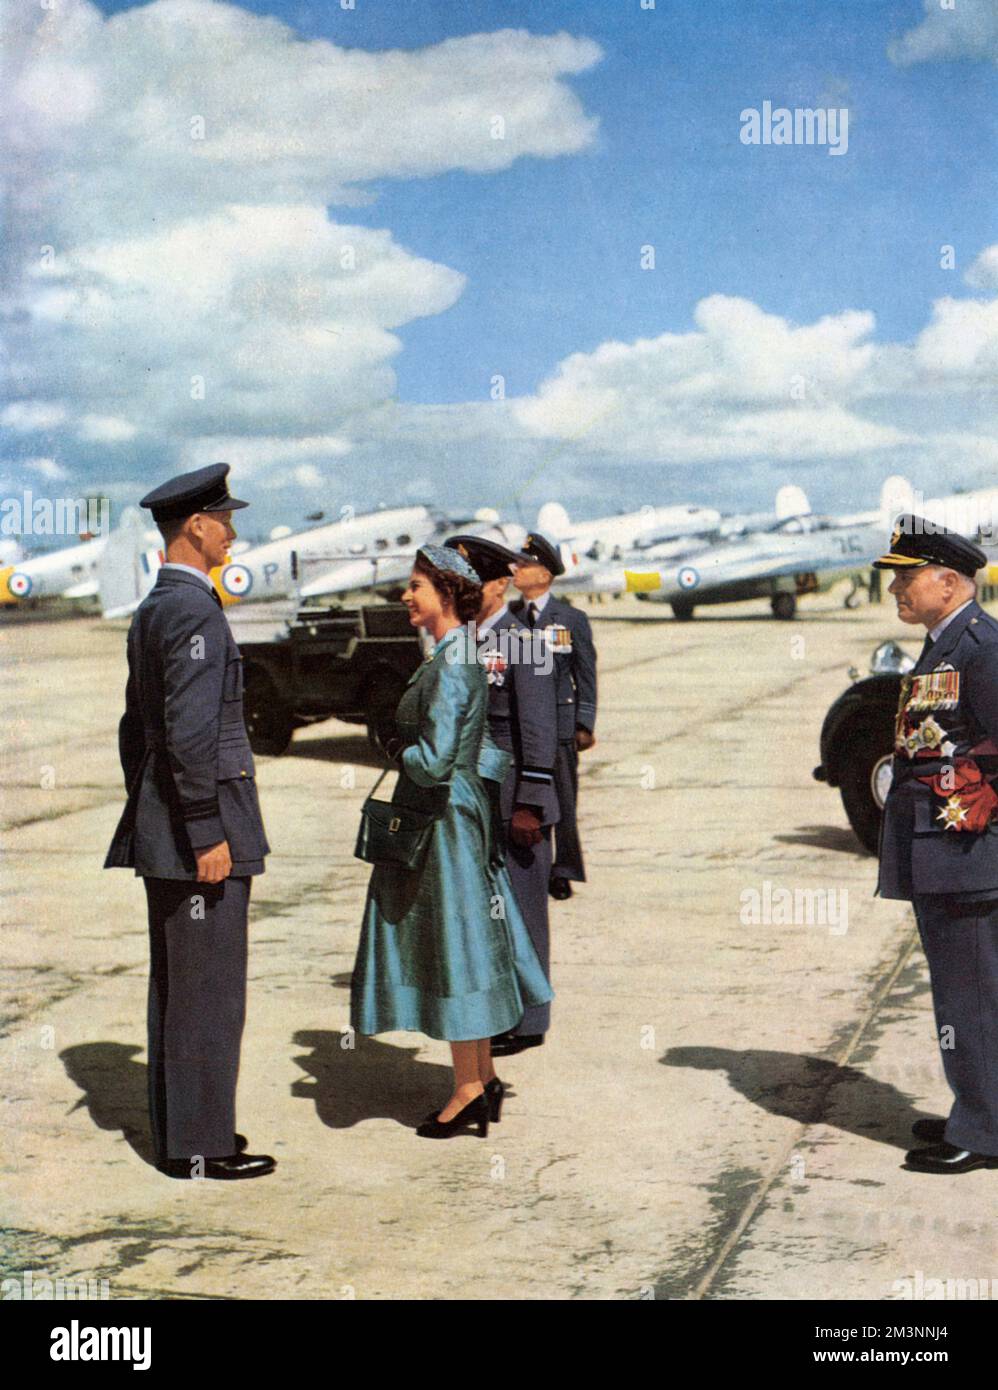 Queen Elizabeth II on her tour of inspection during the RAF Coronation Review at Odiham, Hampshire in July 1953.  She is pictured talking to Observer Commander, E. J. B. Irving of the Royal Observer Corps, and behind her is Air/Cdre.G. D. Stephenson, the Static Parade Commander.  On the right is the Air Chief Marshal Sir William Dickson, Chief of Air Staff, and in the background, Wing Commander D. I. Benham, Static Parade Adjutant.  In the picture can be seen a Land Rover of a type often used by the Queen and other members of the Royal family for parades of this nature.     Date: 1953 Stock Photo